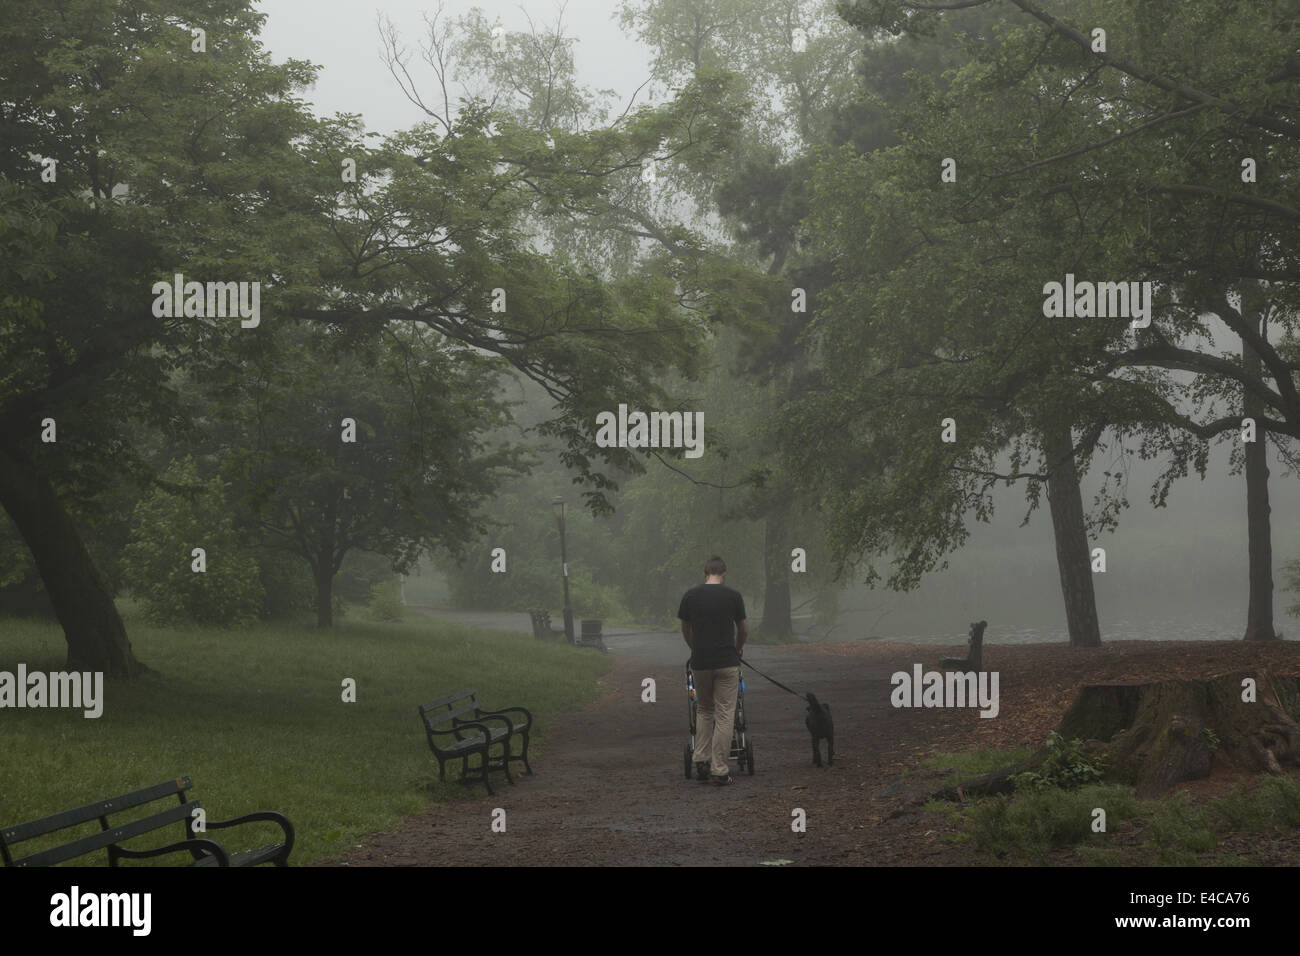 Dad  pushes his baby in a stroller with dog at his side in the early morning. Prospect Park, Brooklyn, NY. Stock Photo